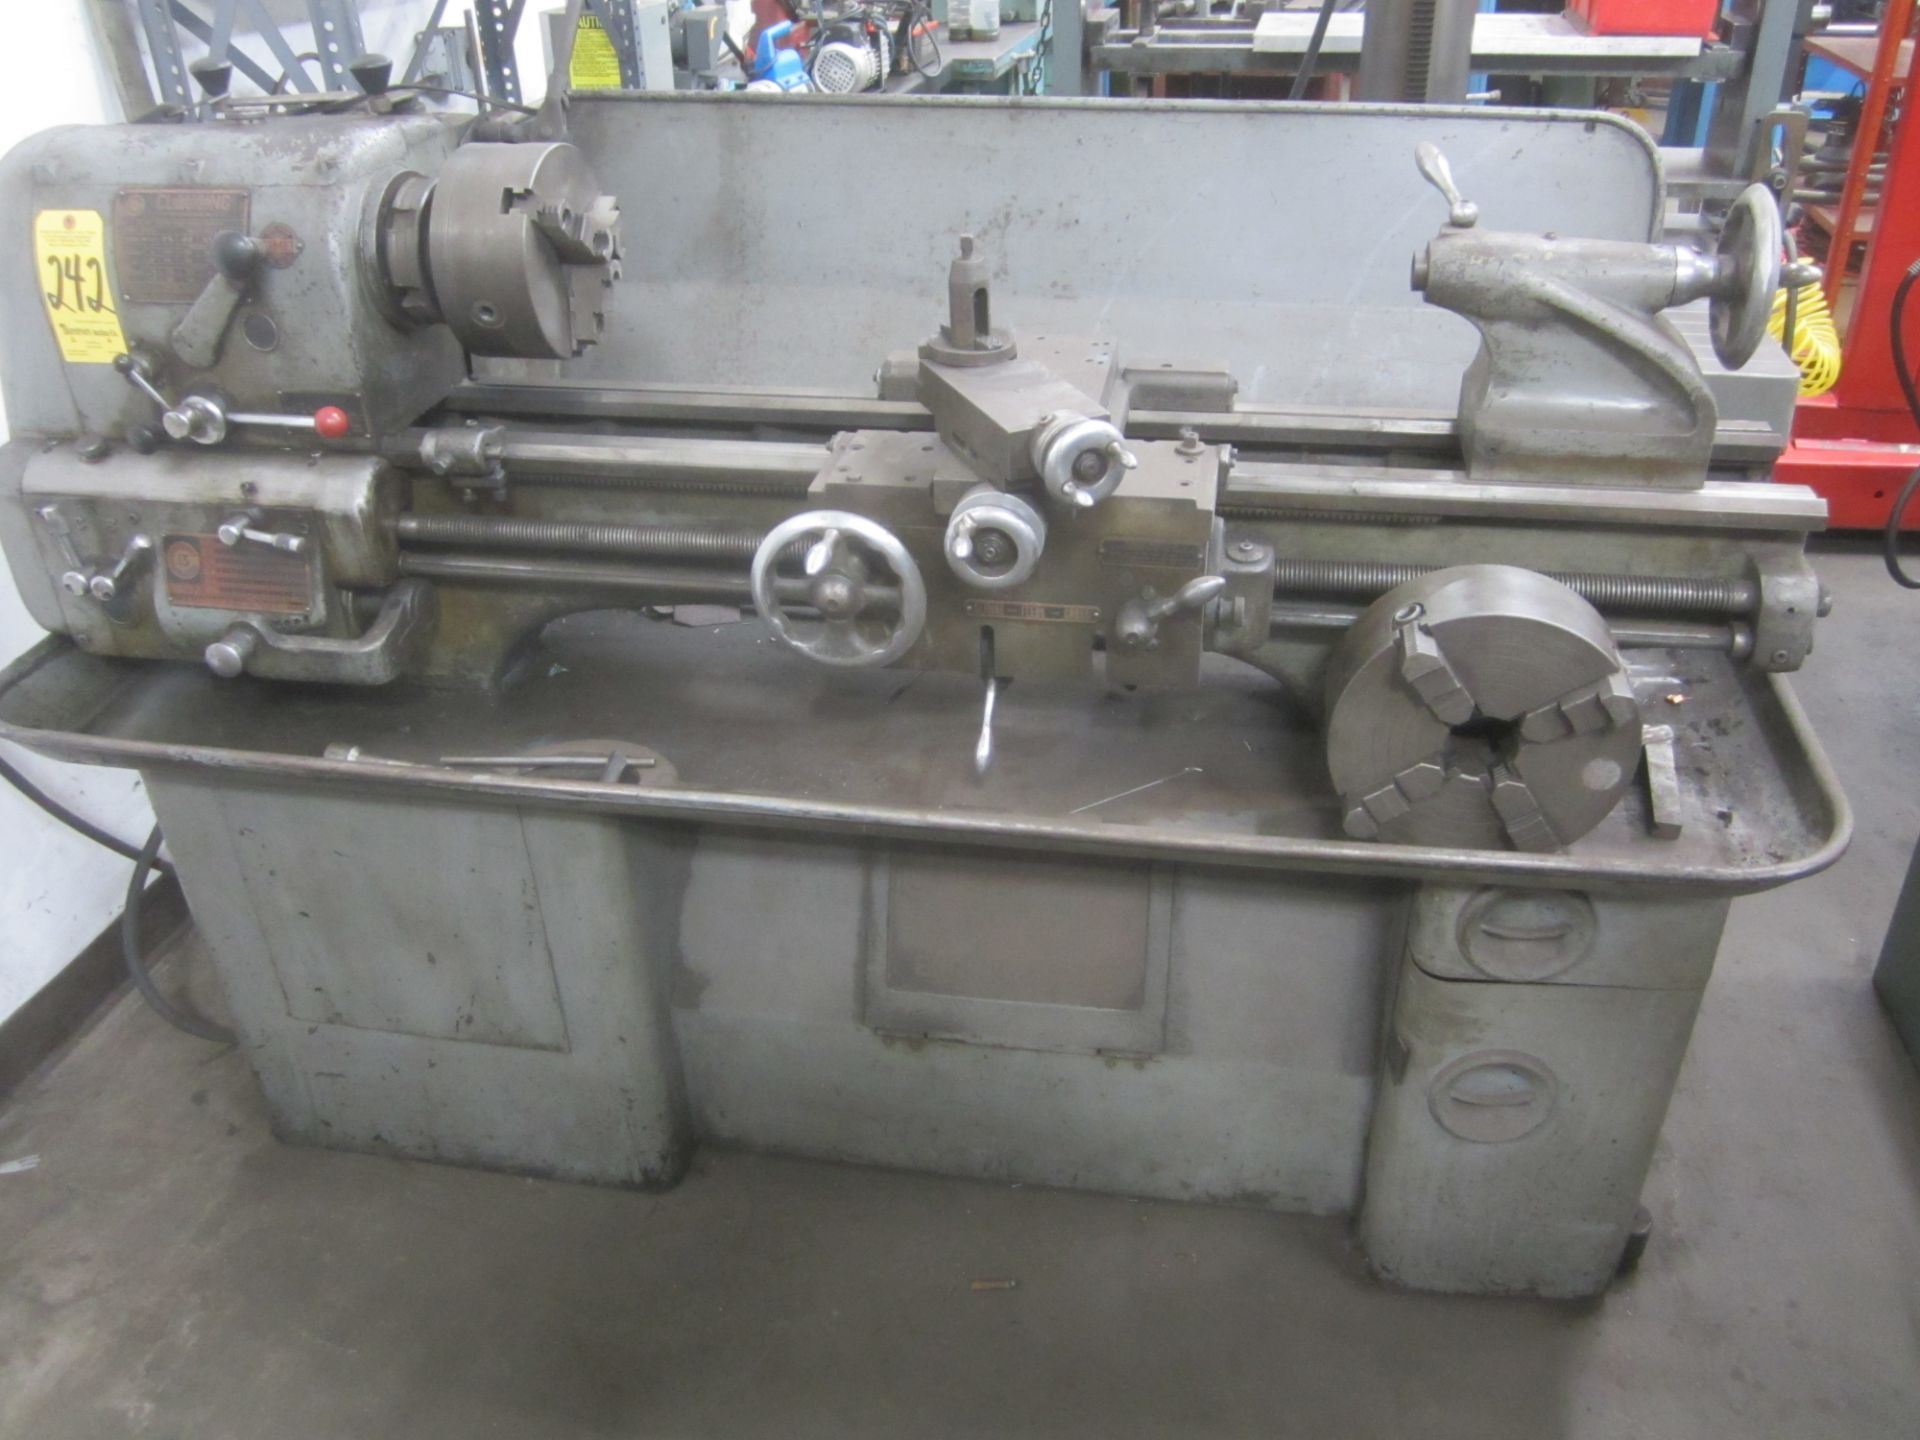 Clausing Colchester 13" X 36" Engine Lathe, s/n 3/34592, 8" 3-Jaw Chuck, 10" 4-Jaw Chuck, Round